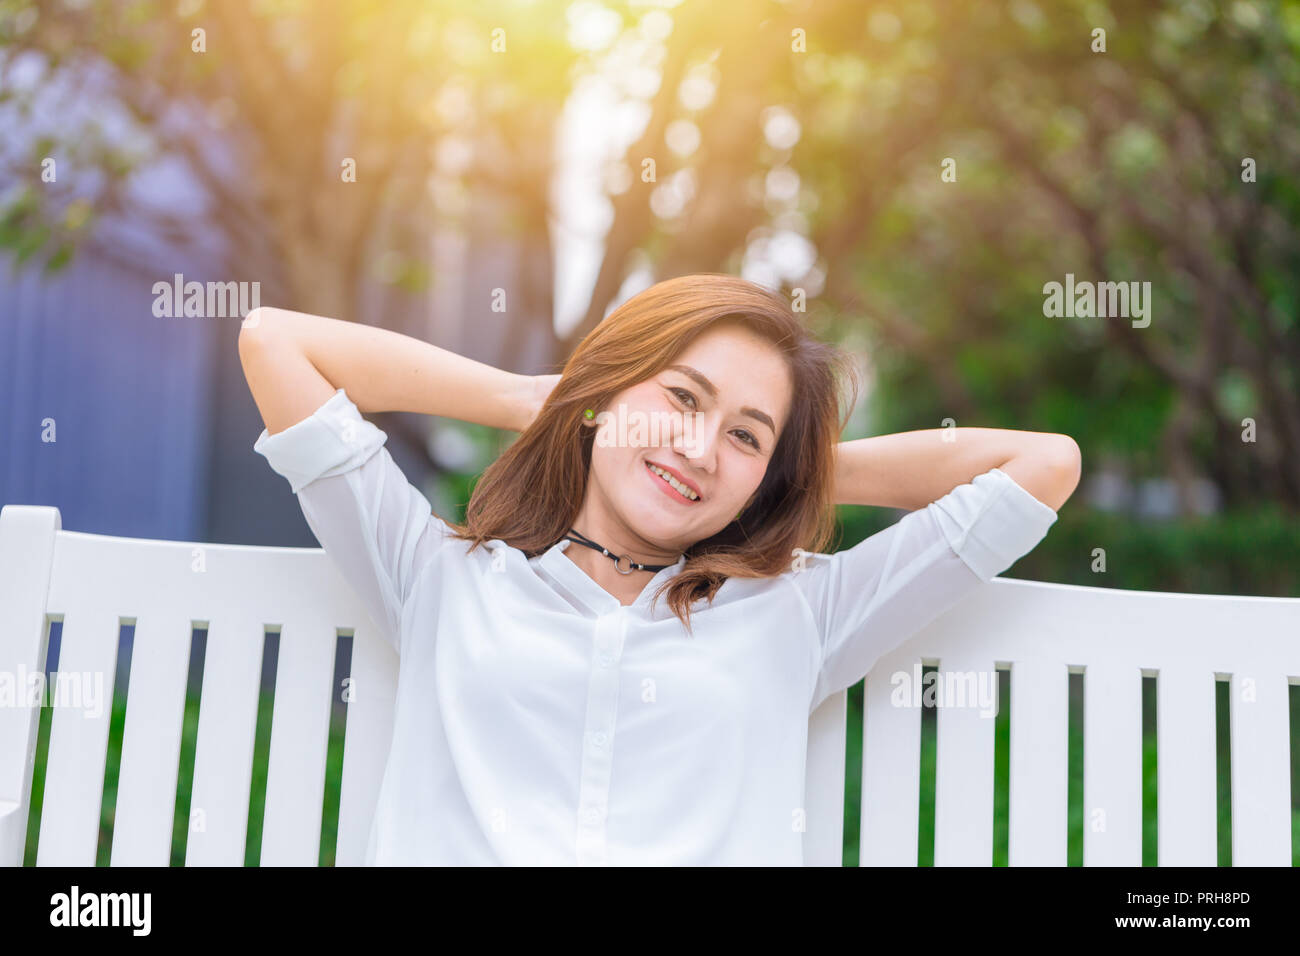 freedom leisure asian girl sitting with free expression happy and smile with life Stock Photo